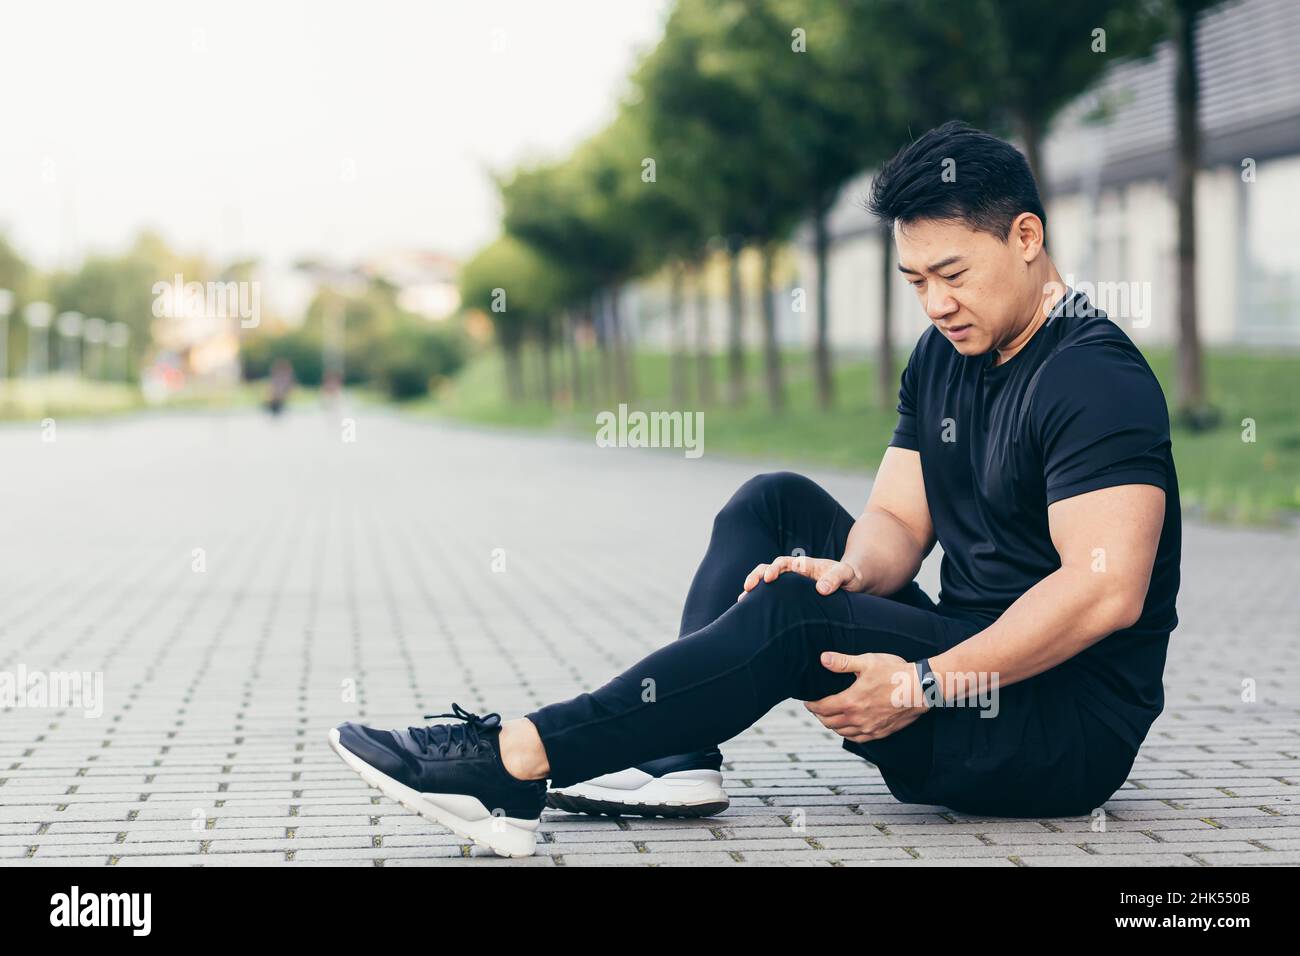 Asian man after fitness workout and jogging sits on the ground and suffers from leg pain, massages leg muscles Stock Photo